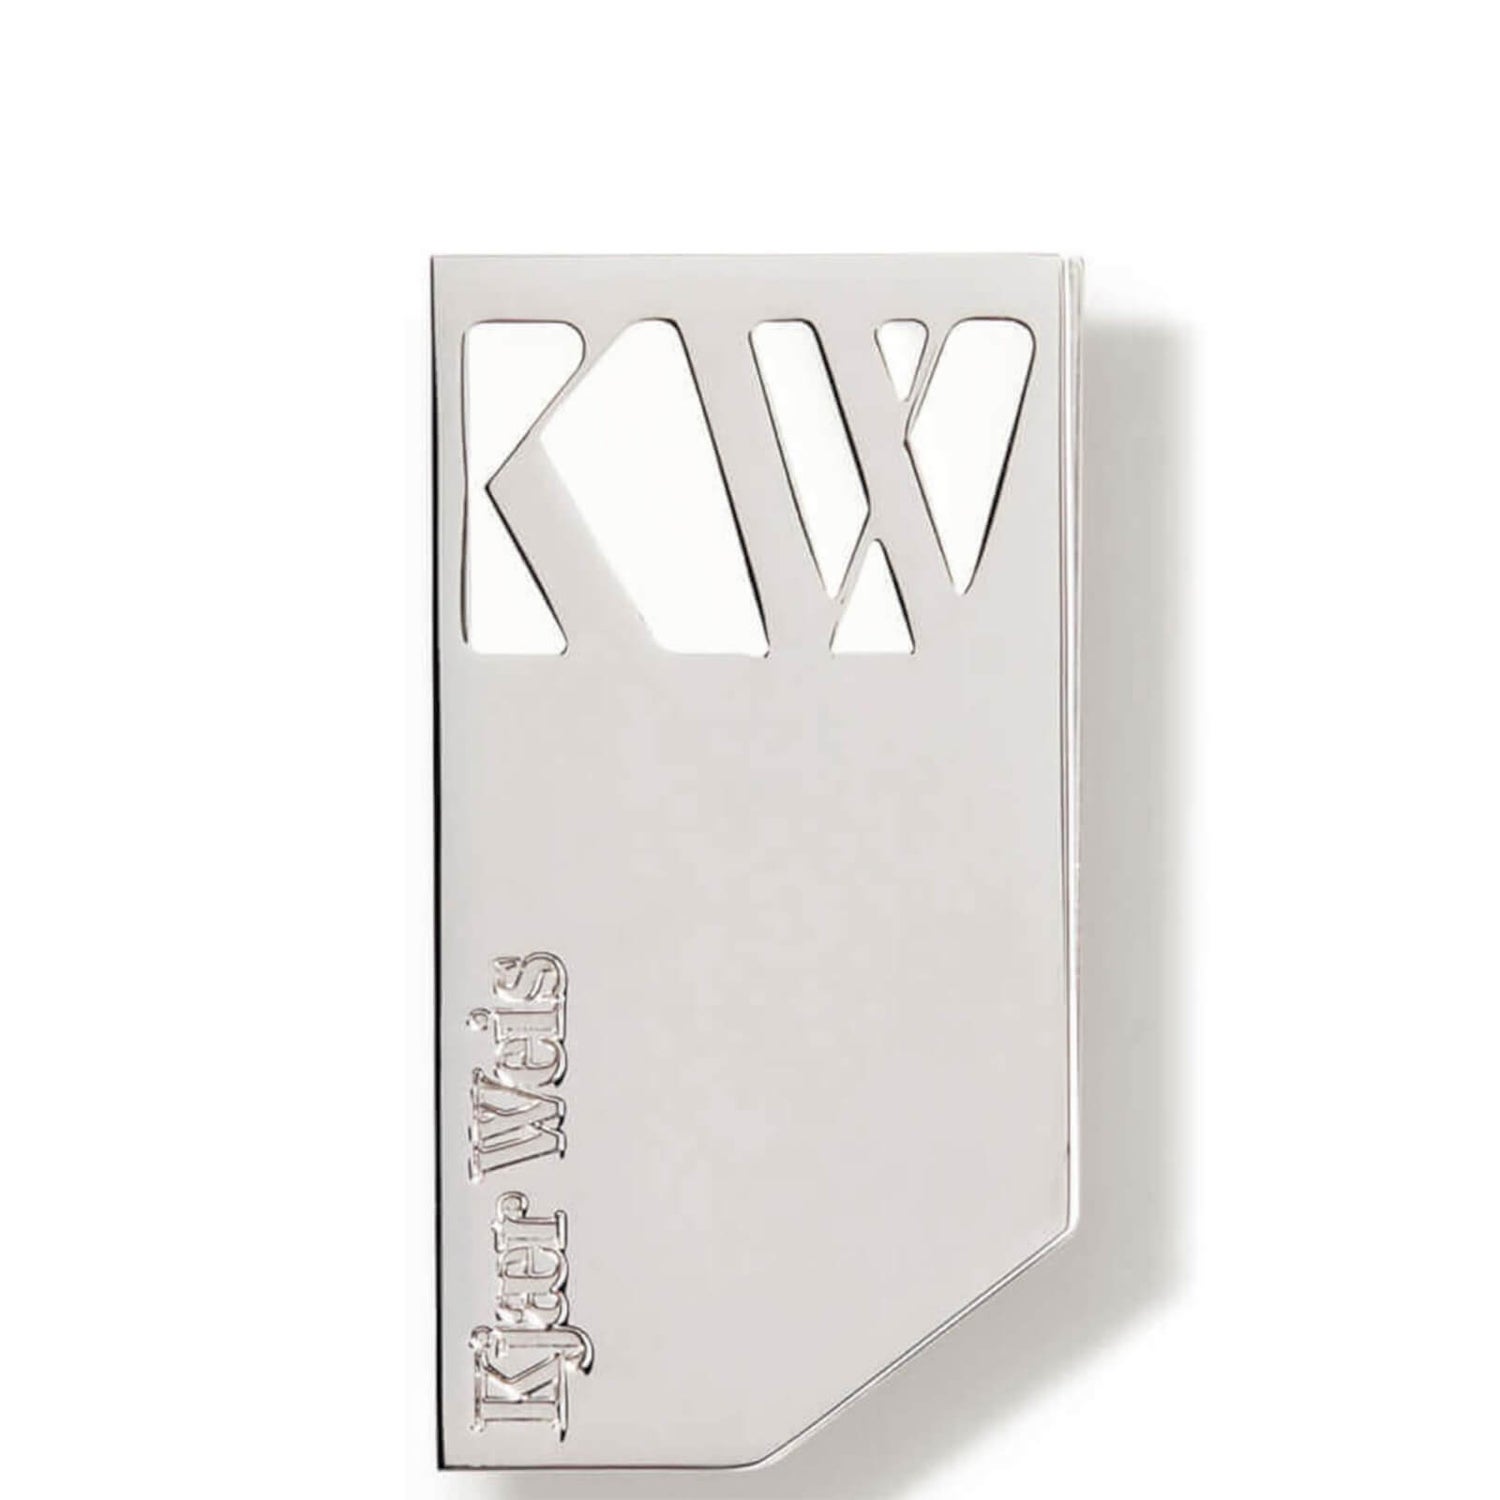 Kjaer Weis Iconic Edition Compact - Lip Tint (1 piece)